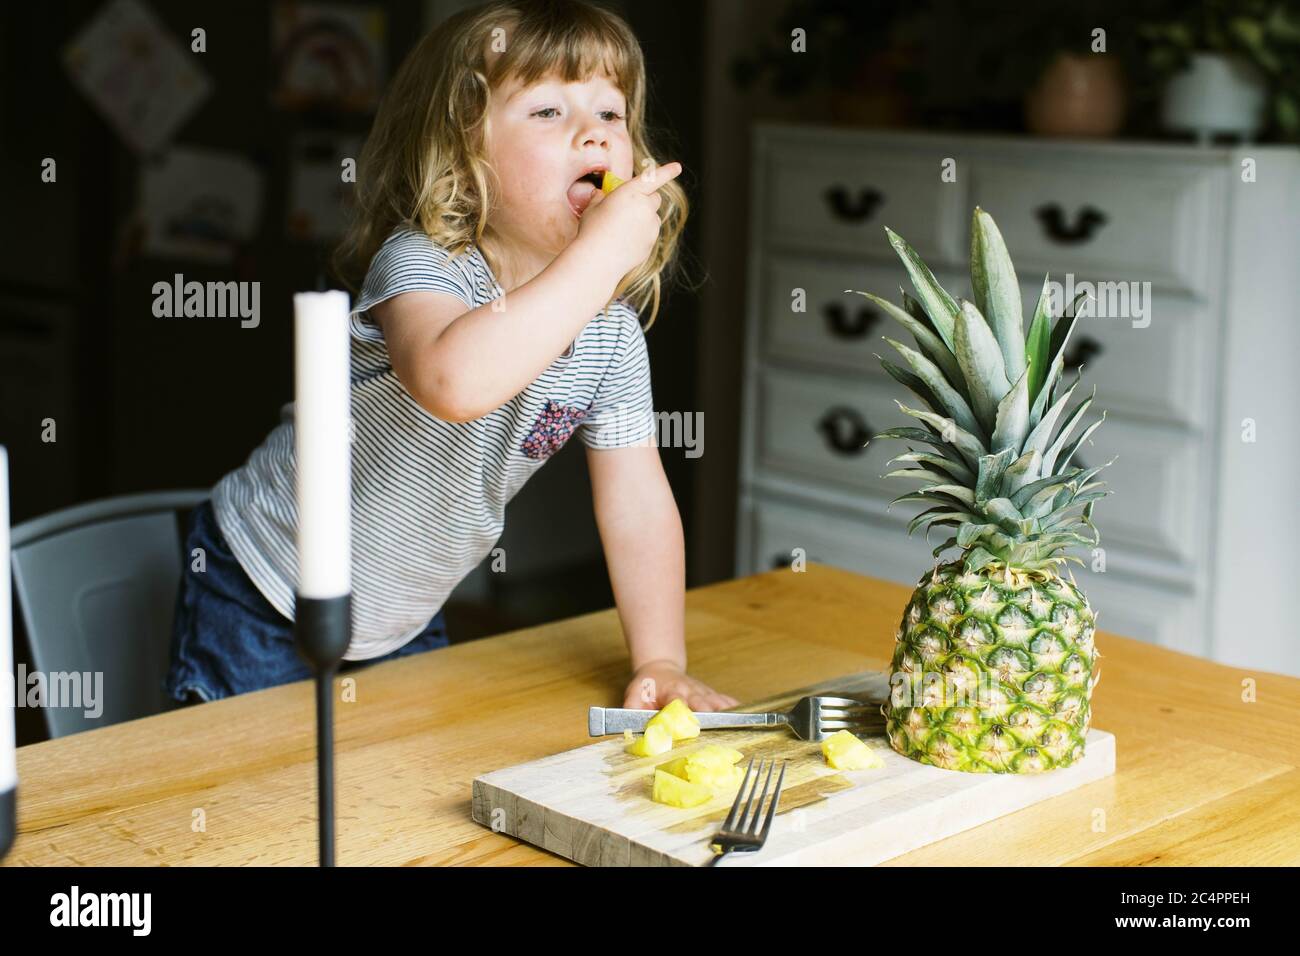 A little toddler girl having a healthy pineapple snack Stock Photo